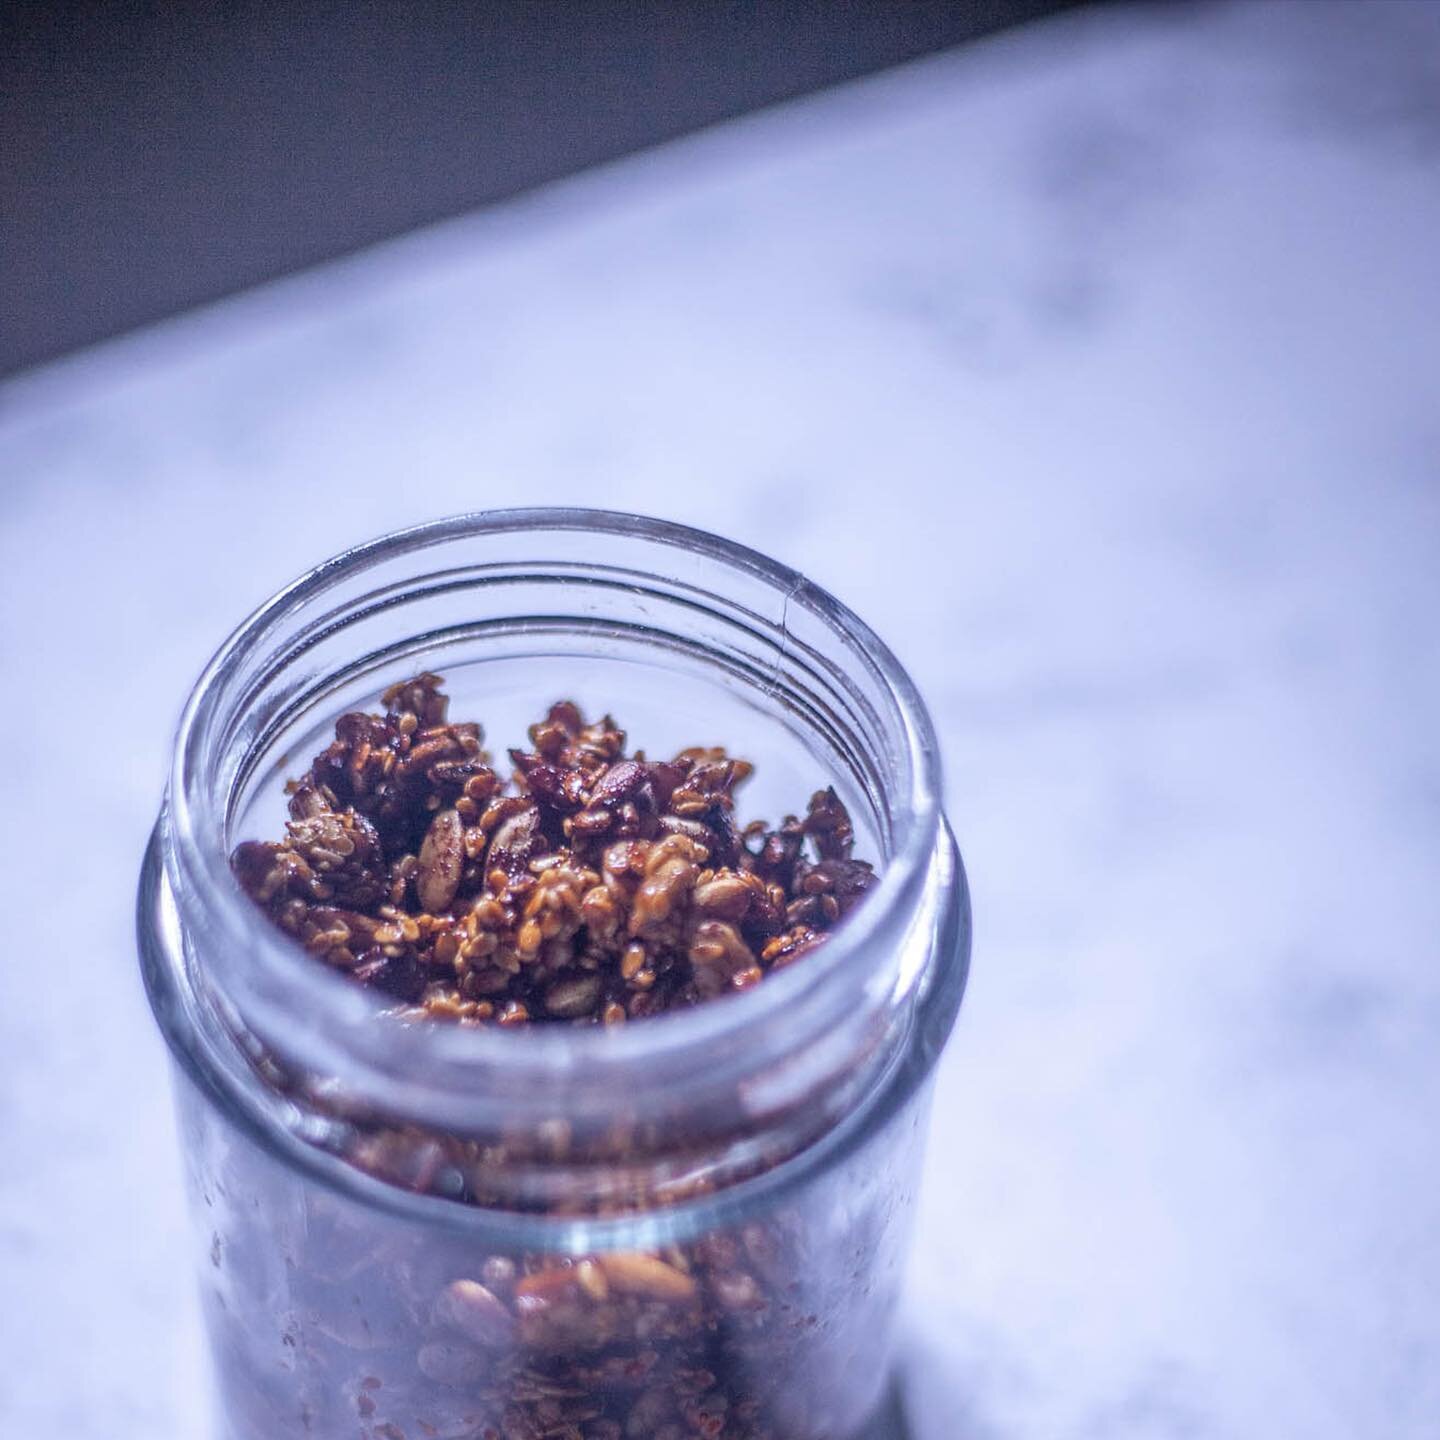 | BE WELL | Cook | Crunchy Umami Multi-Seed Topping &mdash; A healthy and delicious crunchy seed mix consisted of sunflower, pumpkin and sesame seeds, coated and roasted in an Asian-inspired sauce.  Sprinkle it generously on soups and salads.  Eat it